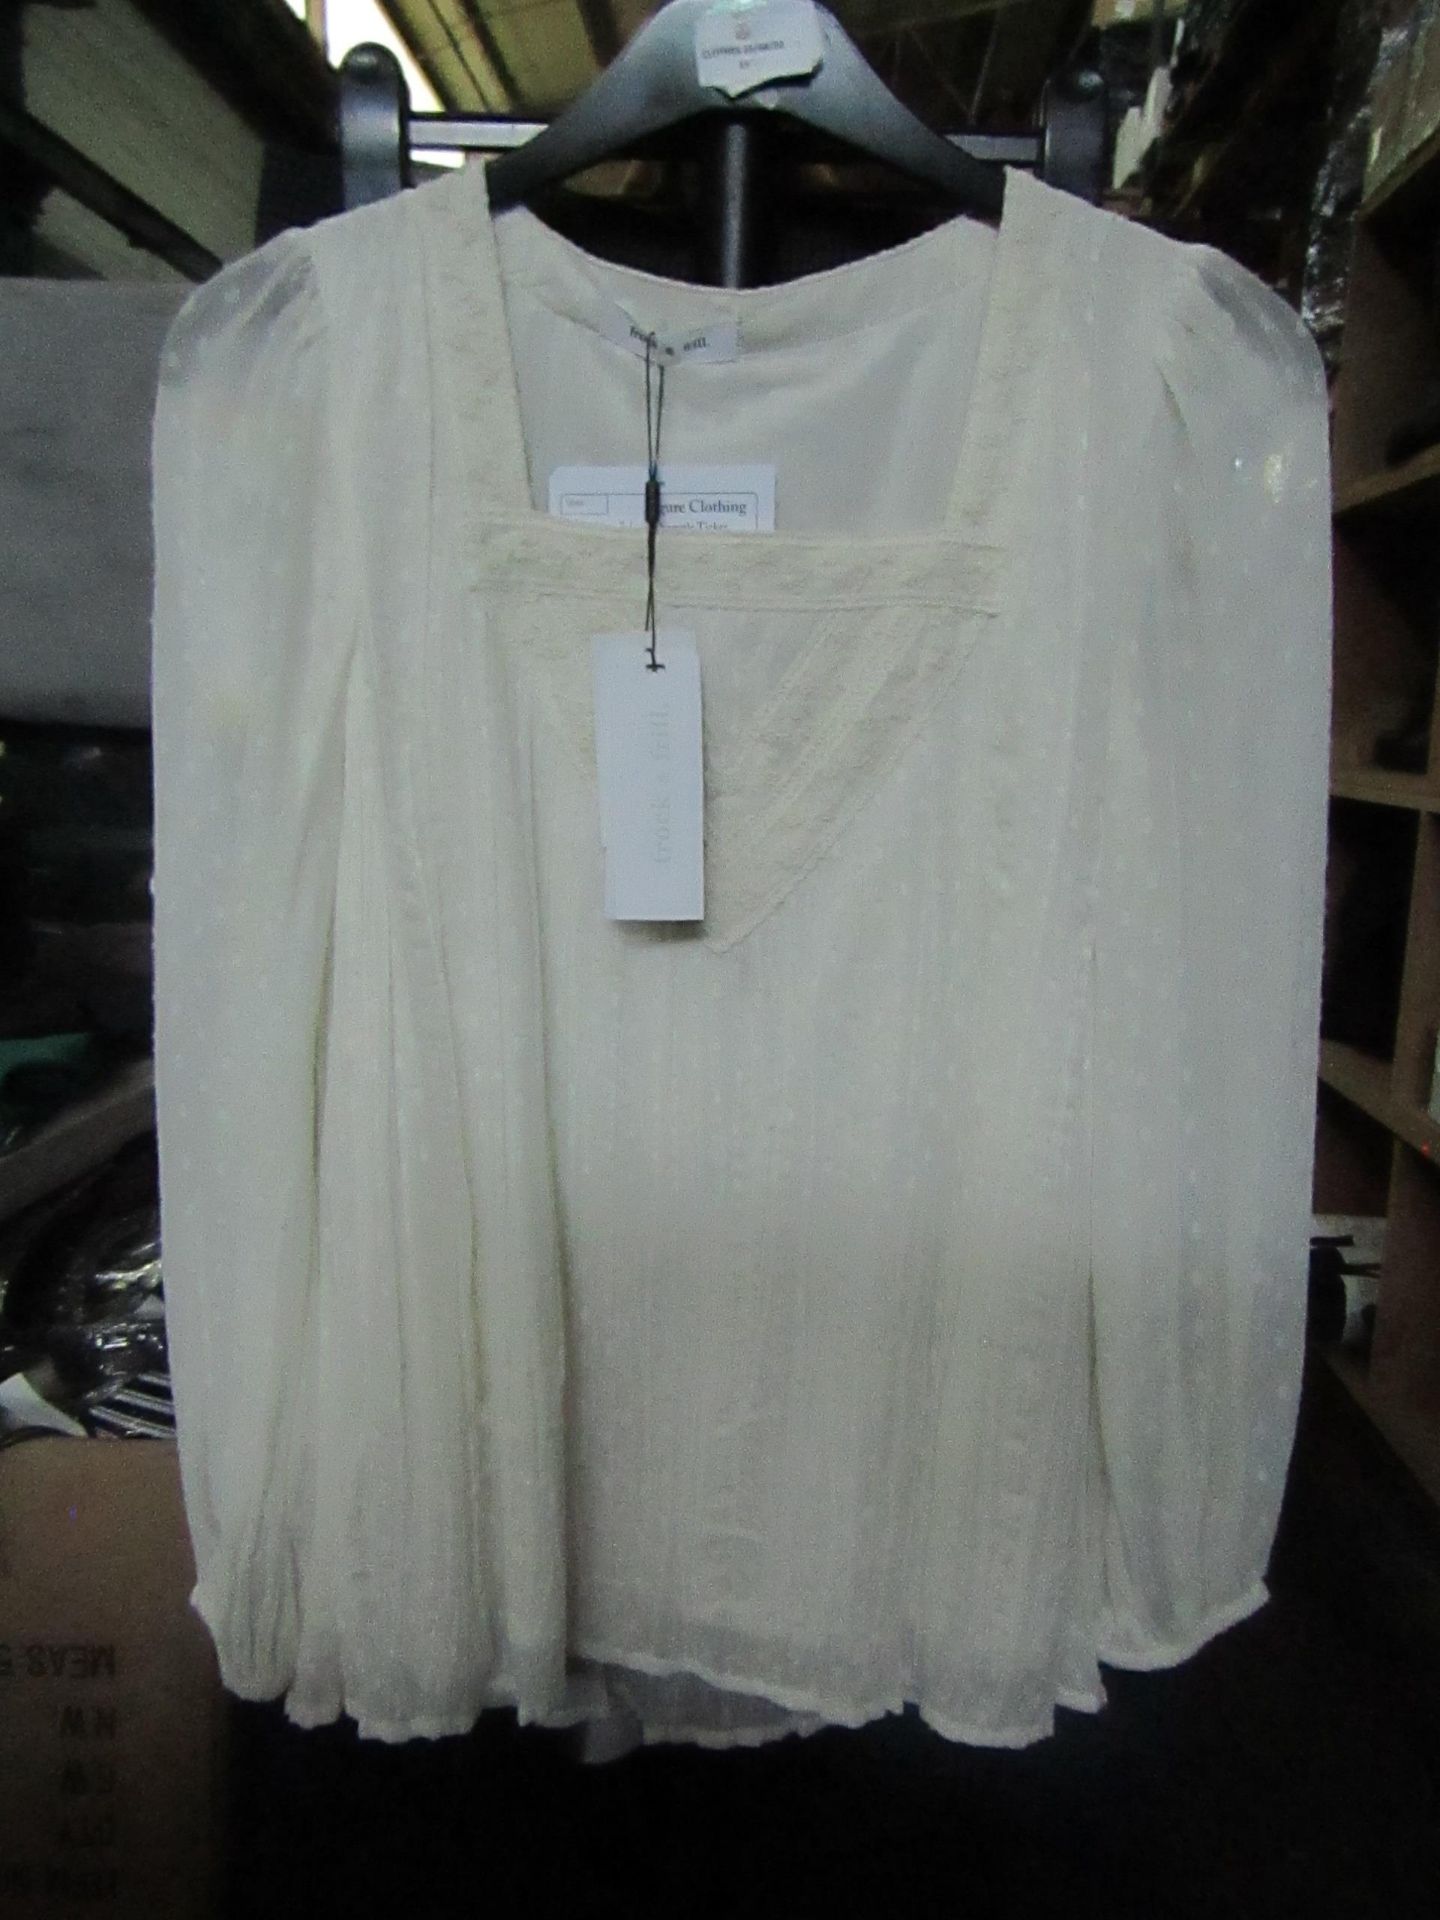 Frocka dn frill ladies blouse, size 8, new